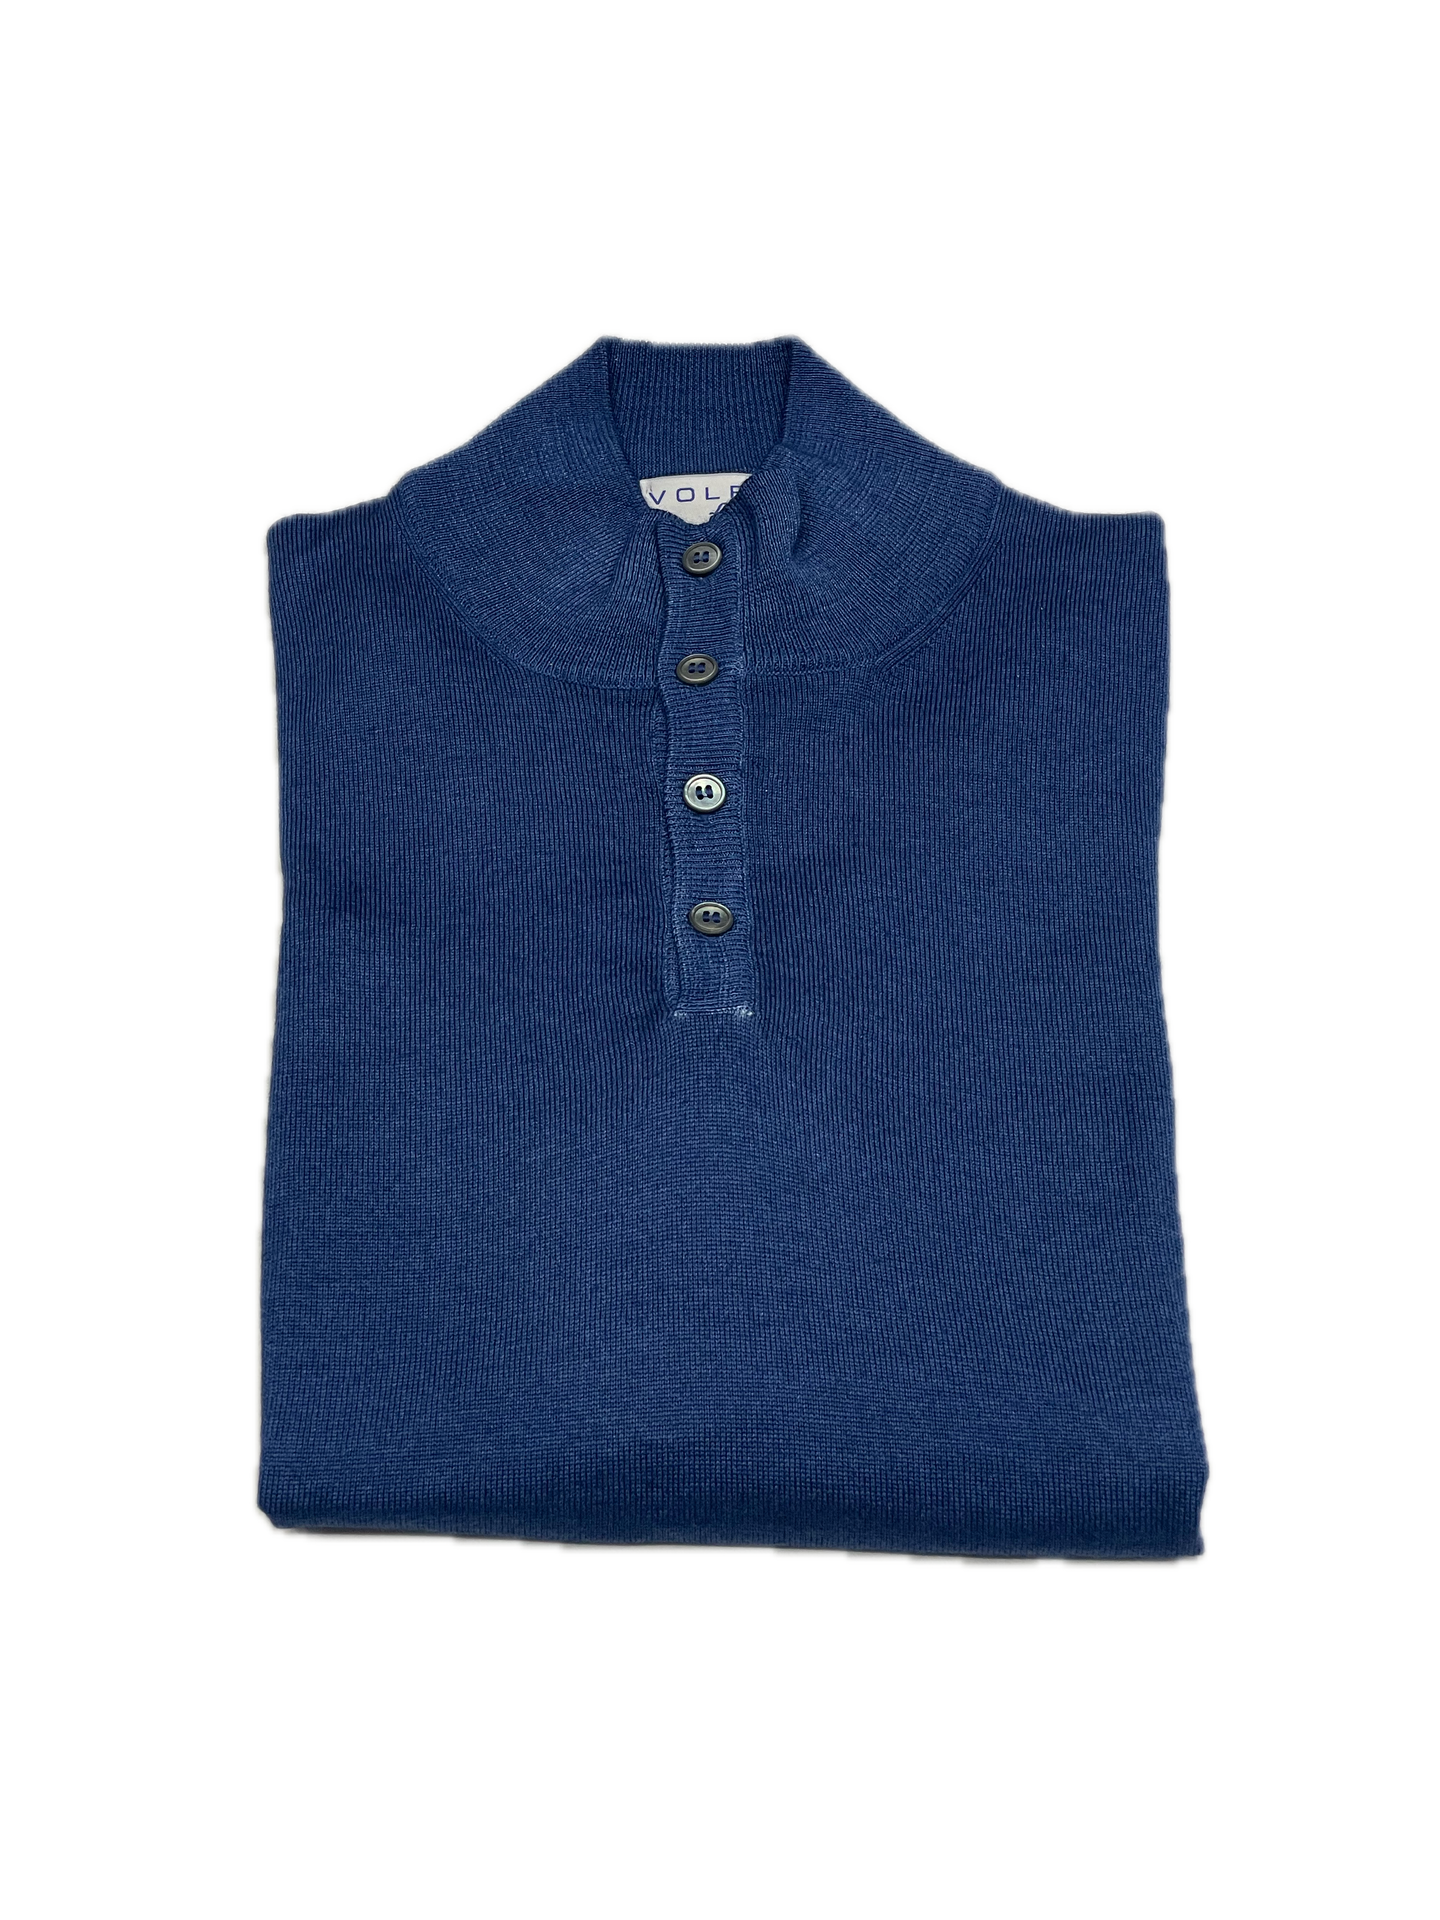 Button neck pullover in Mid Blue vintage merino wool